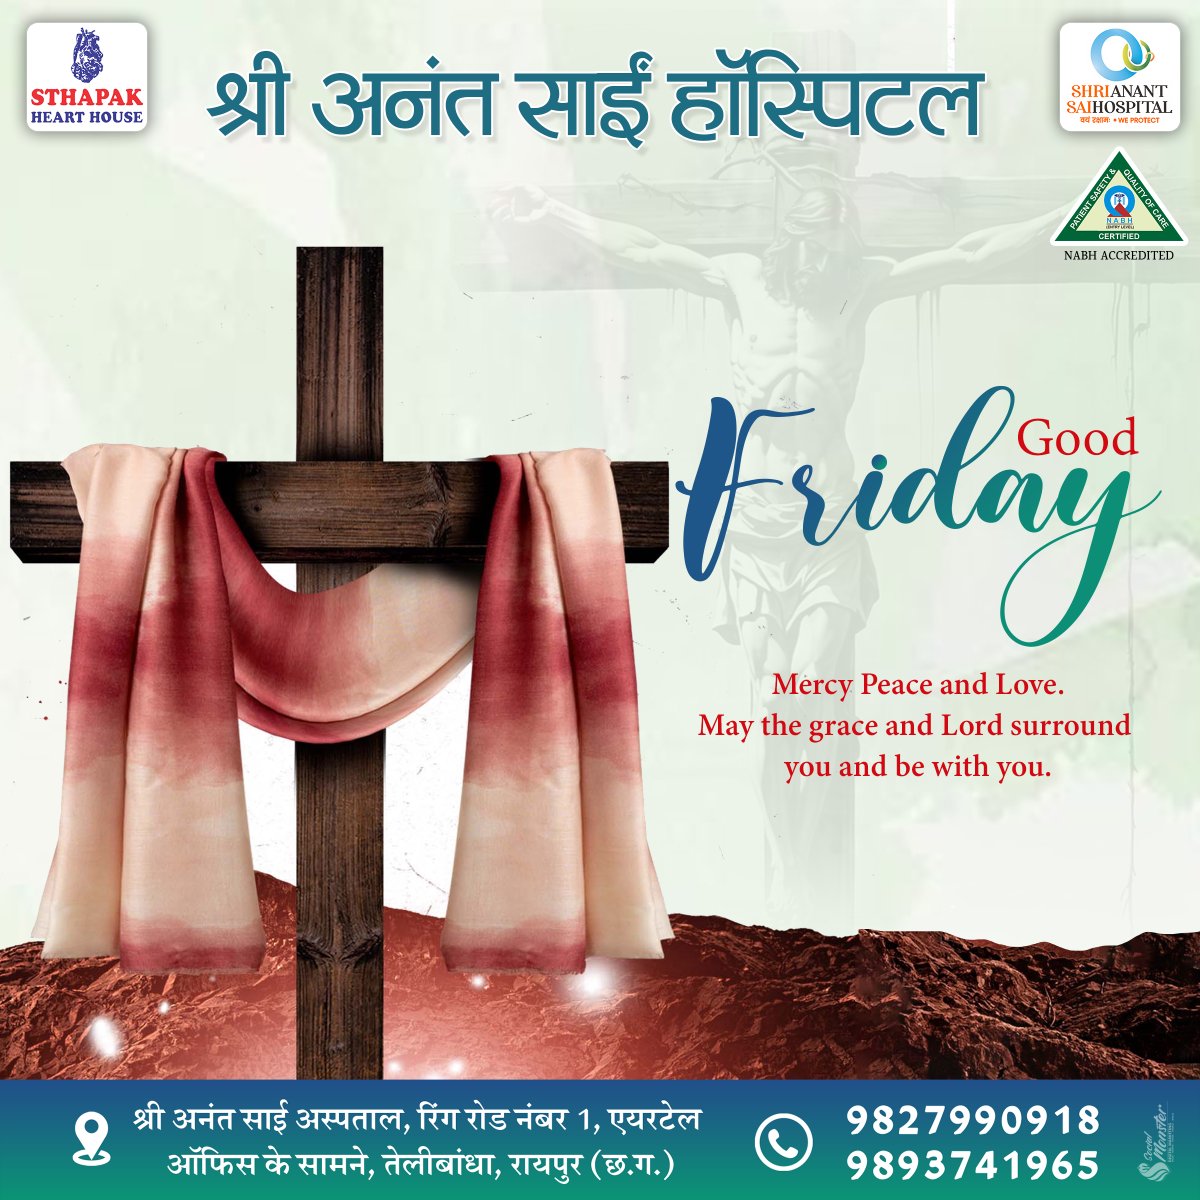 May the grace, peace, and love of Good Friday surround you, bringing comfort and blessings.
.
.
.
.
#asthma #heartattack #cardiology #orthopedics #gynecologist #neurologist #pilestreatment #MigraineRelief #Trauma